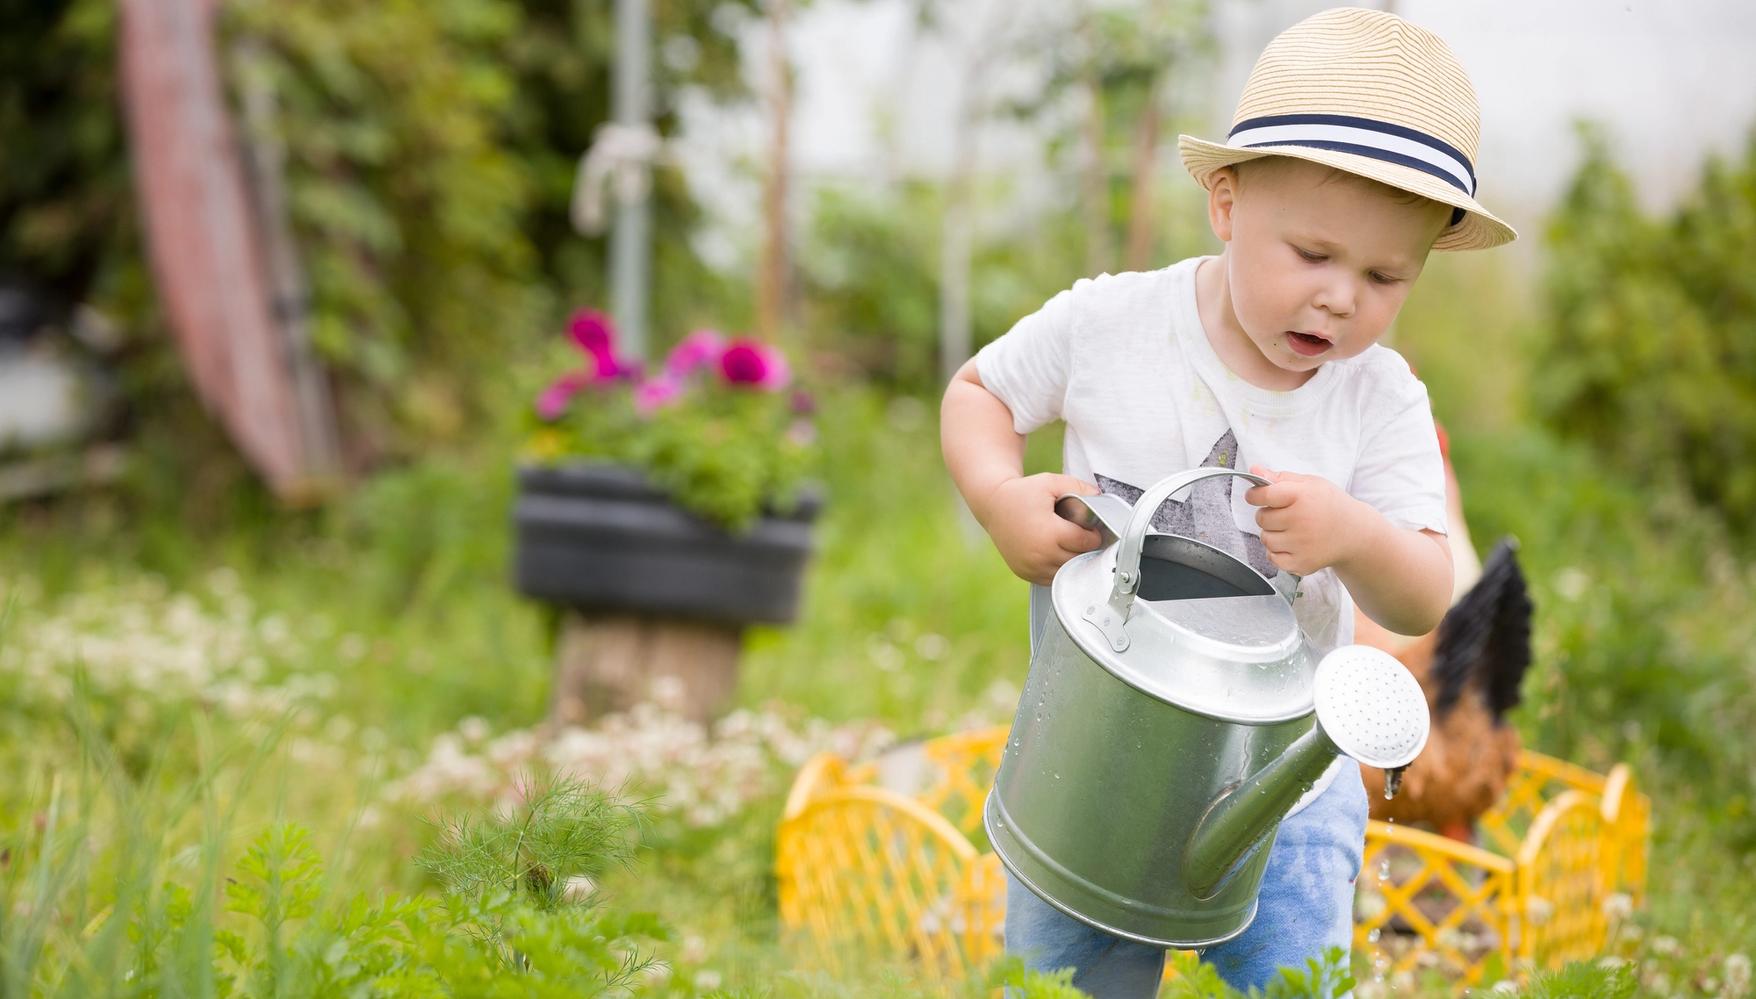 A child wearing a hat holding a watering can 